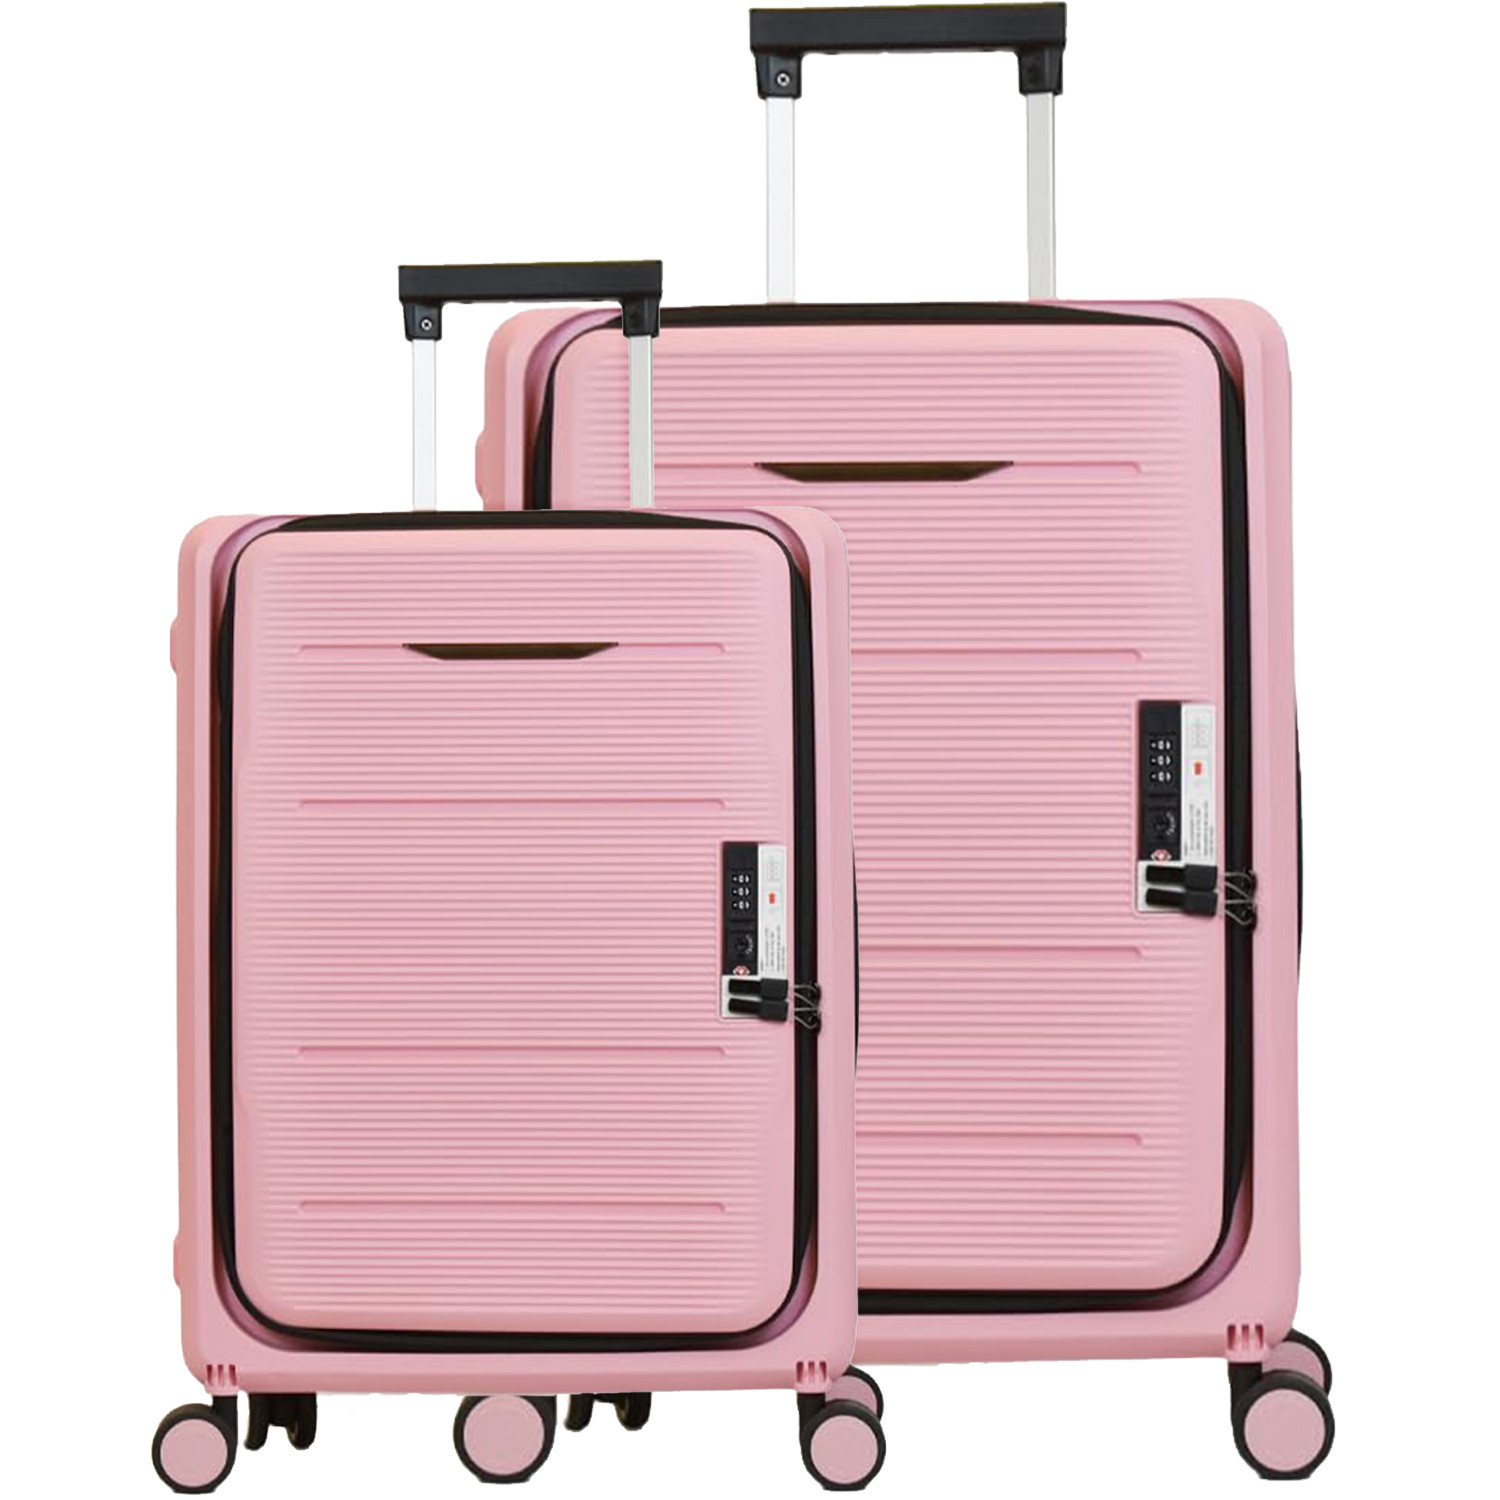 Kuber Industries Luggage Bag | Trolley Bags for Travel | Collapsible Luggage Bag | Travelling Bag | Trolley Bags for Suitcase | Lightweight Luggage Bag | 20P-24P Inch | Rose Pink